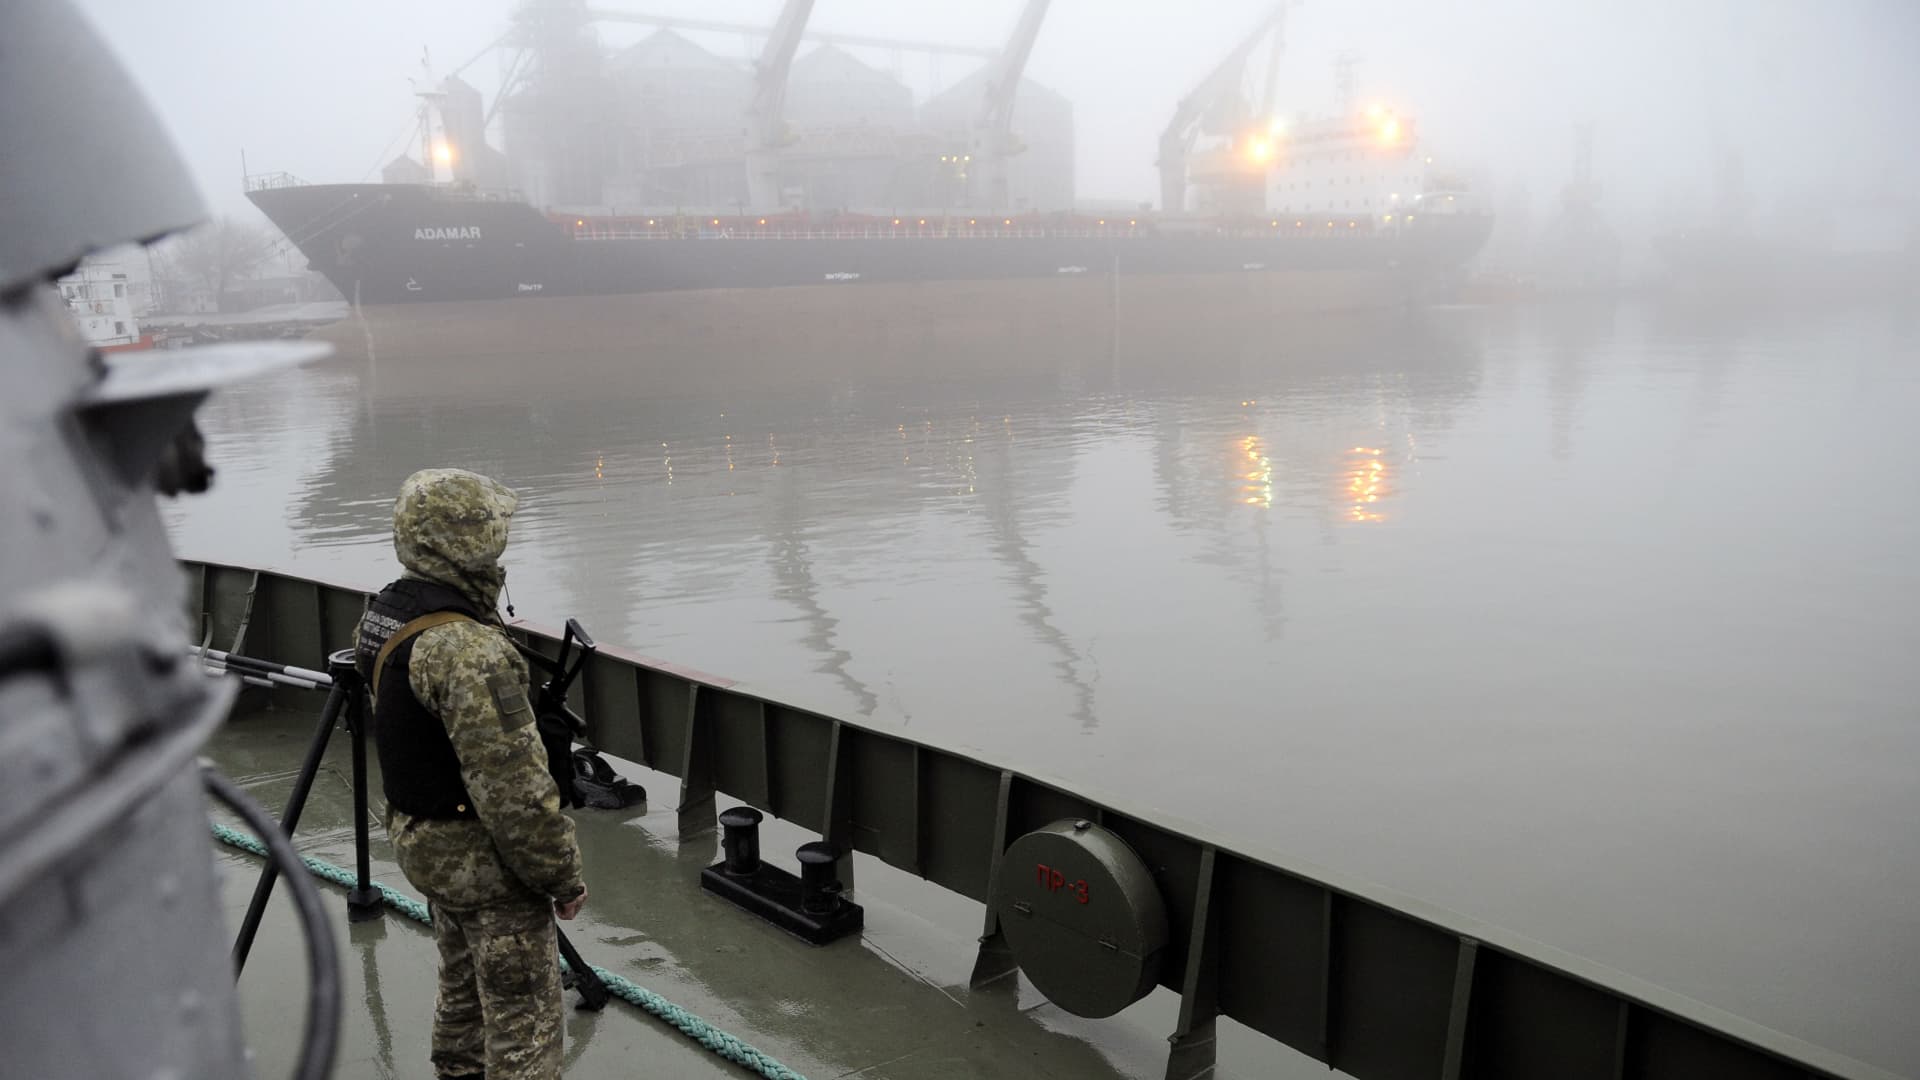 Ukrainian soldier stands guard aboard military boat called 'Dondass' moored in Mariupol, Sea of Azov port on November 27, 2018. - Three Ukrainian navy vessels were seized off the coast of Crimea by Russian forces, which fired on and boarded Kiev's ships after several tense hours of confrontation. Here's what is known about Sunday's incident.